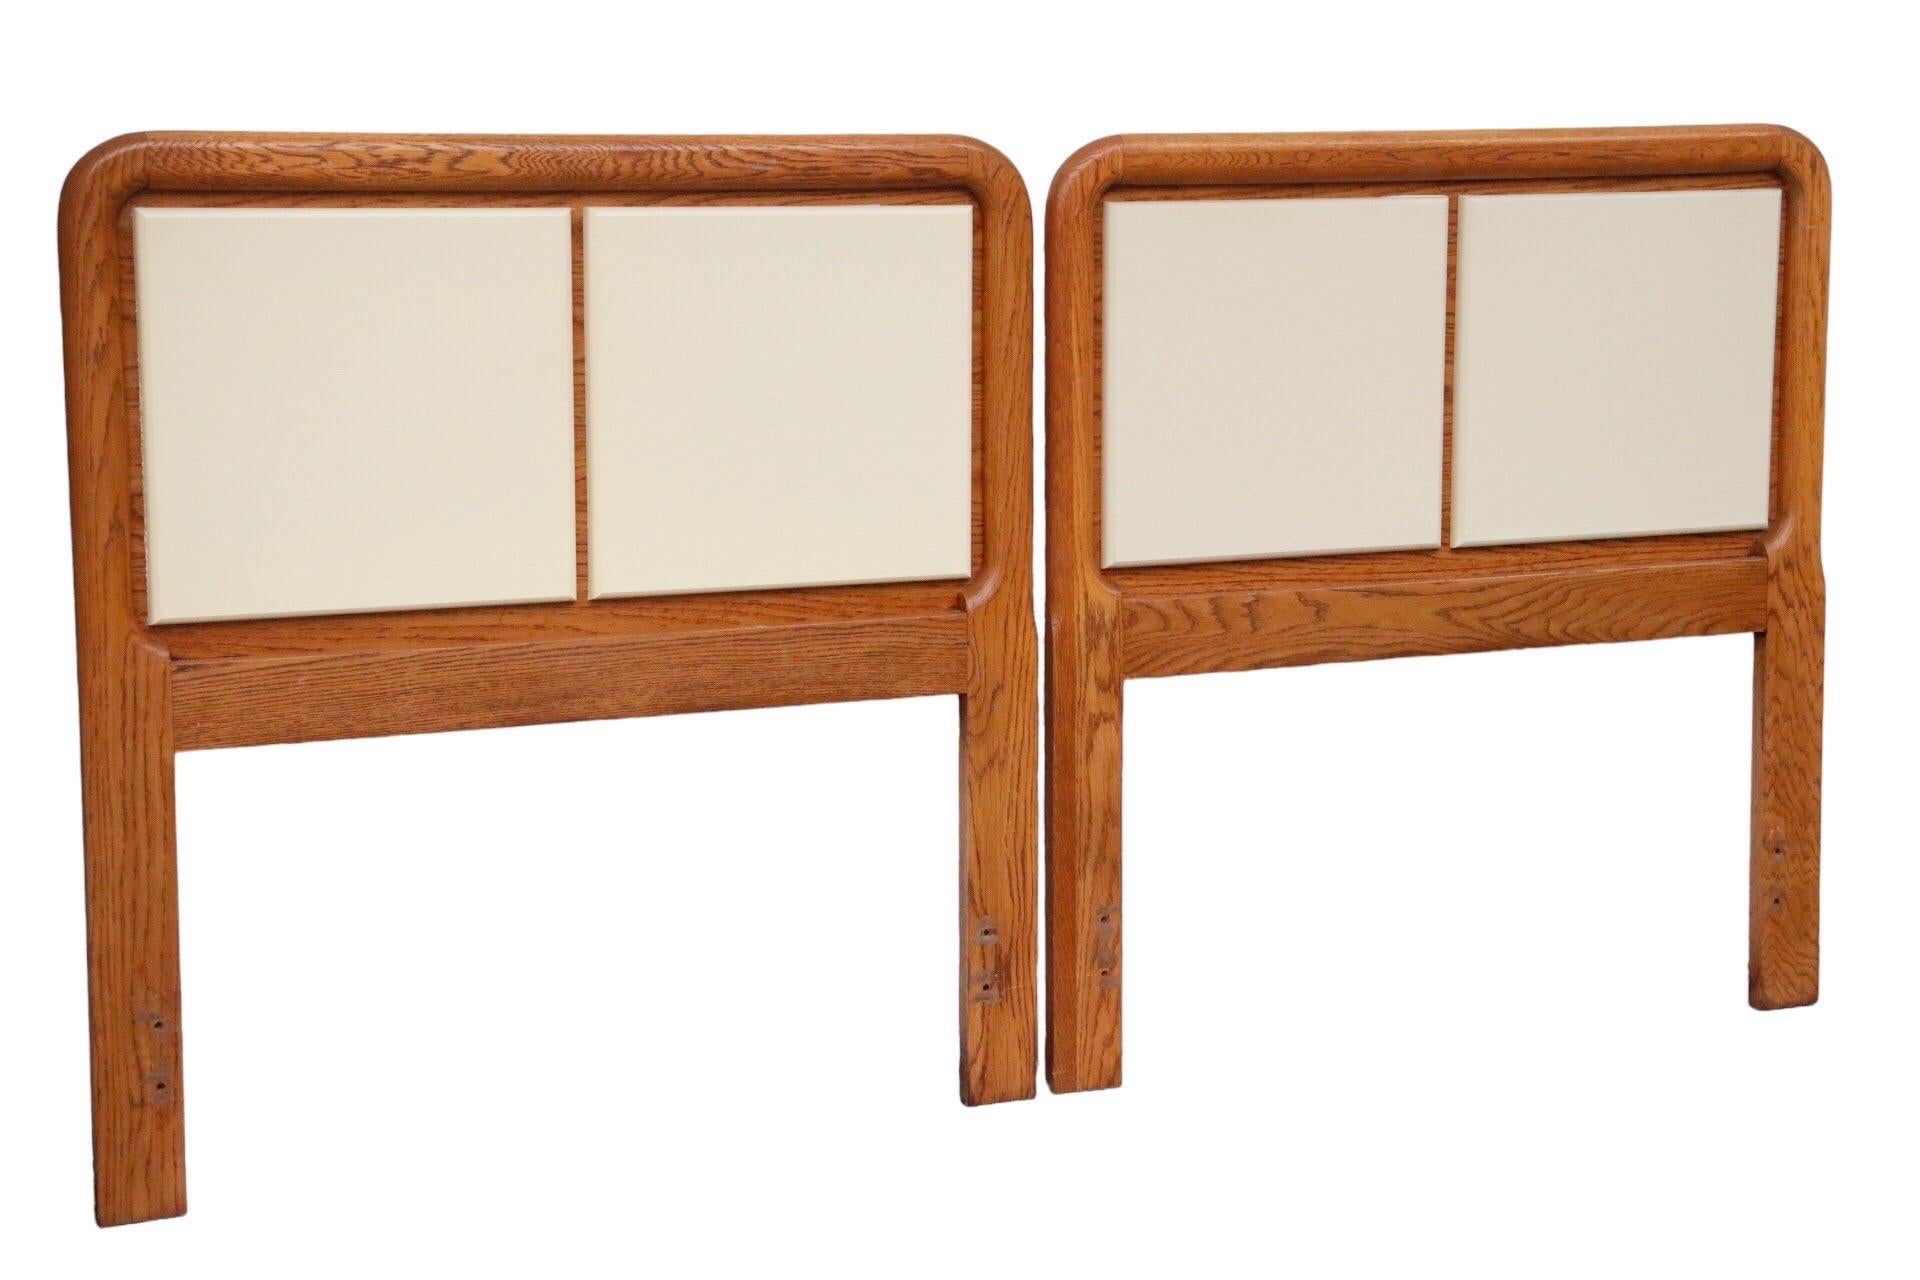 A pair of twin size mid-century headboards made of oak. Each has a gently curved frame, inset with two square panels painted a light cream. Dimensions per headboard.
